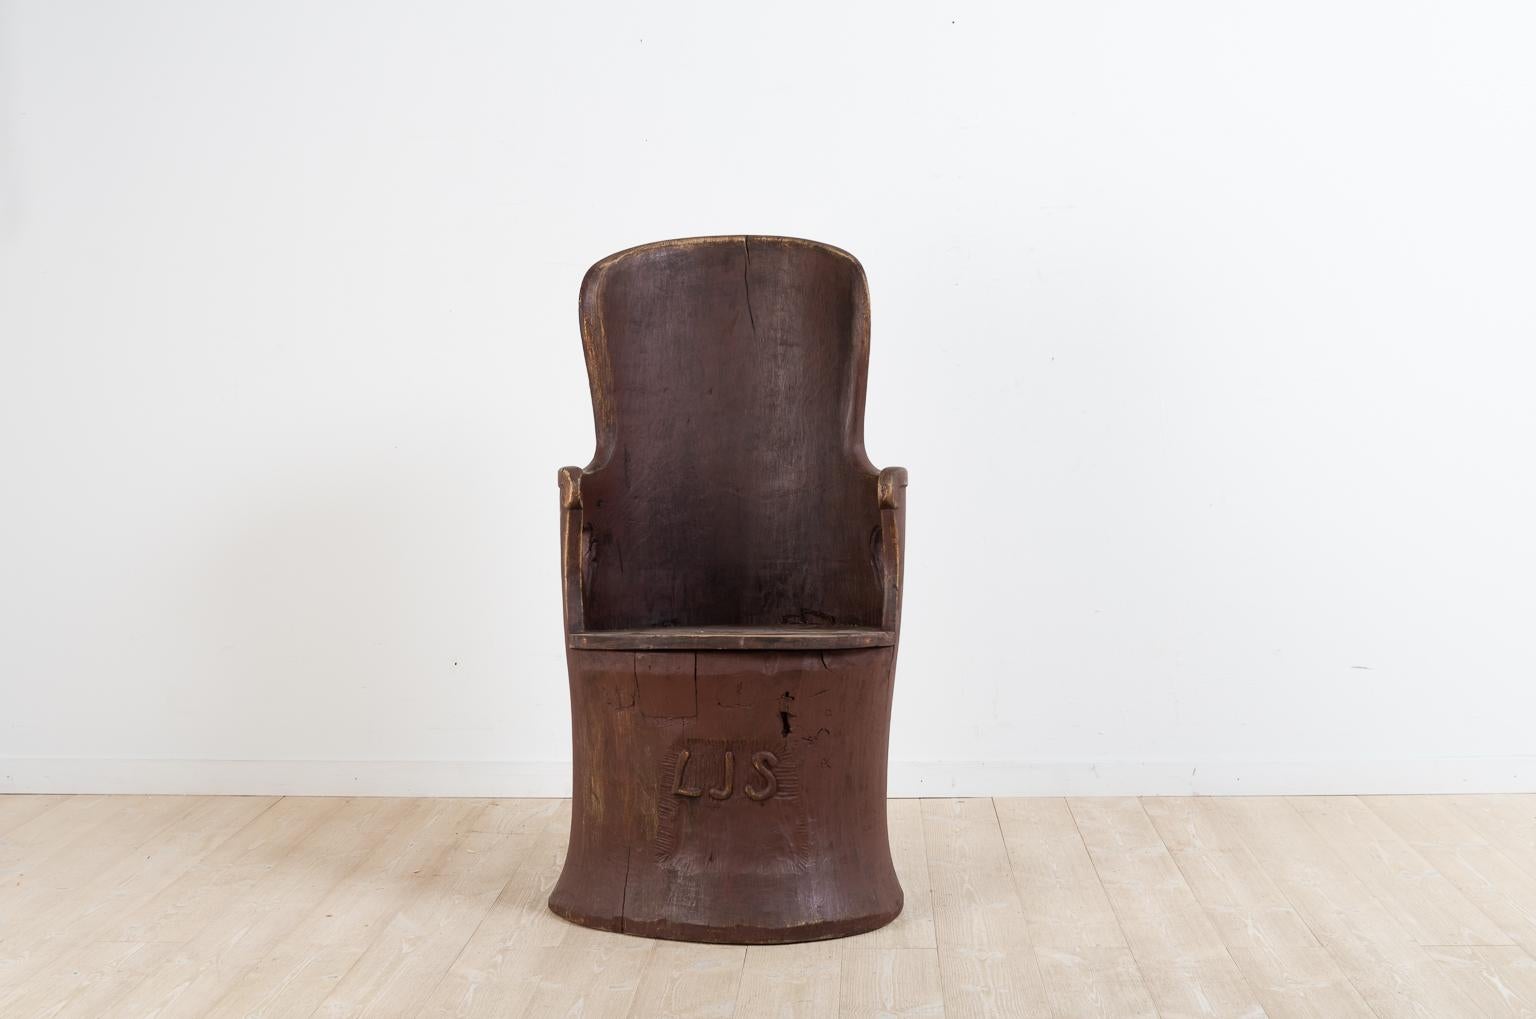 Swedish Folk Art kubbstol manufactured from a hollowed pine trunk. It has a carved monogram under the seat. The armrest on the sides each have a cutout in the shape of a heart. The kubbstol has an older repair under the seat. 

Manufactured in